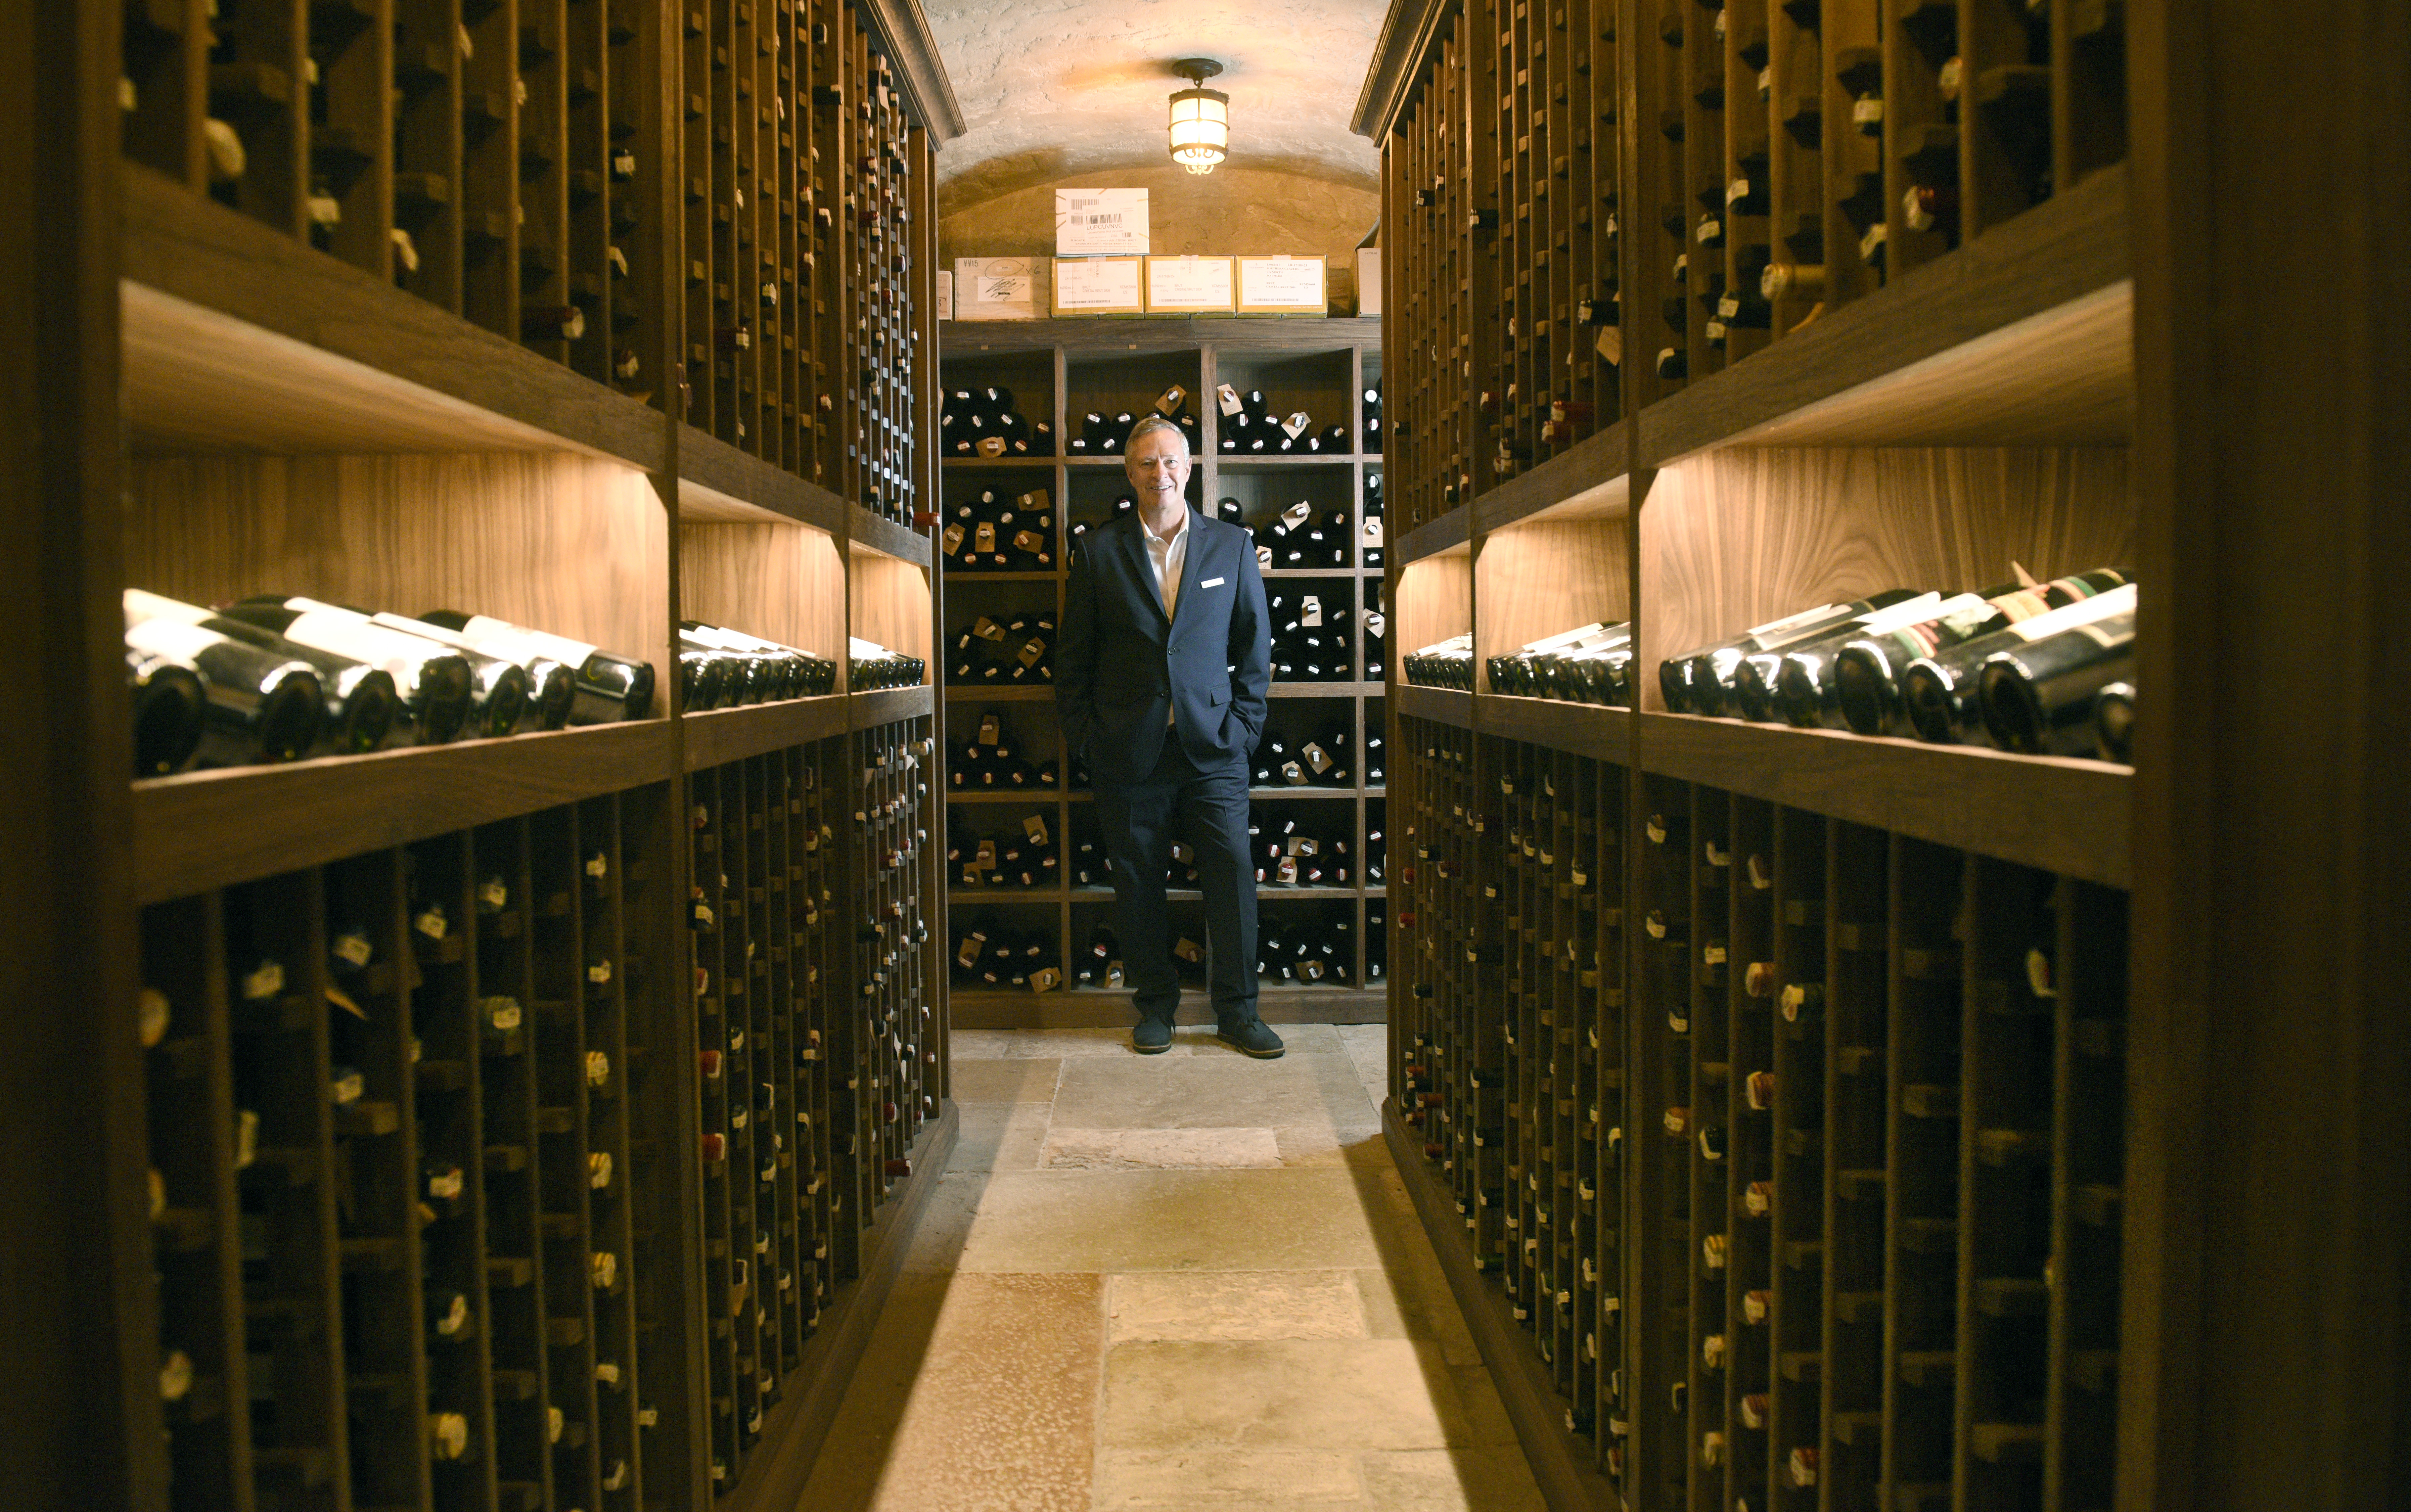 Appellation Archives - The Wine Cellarage